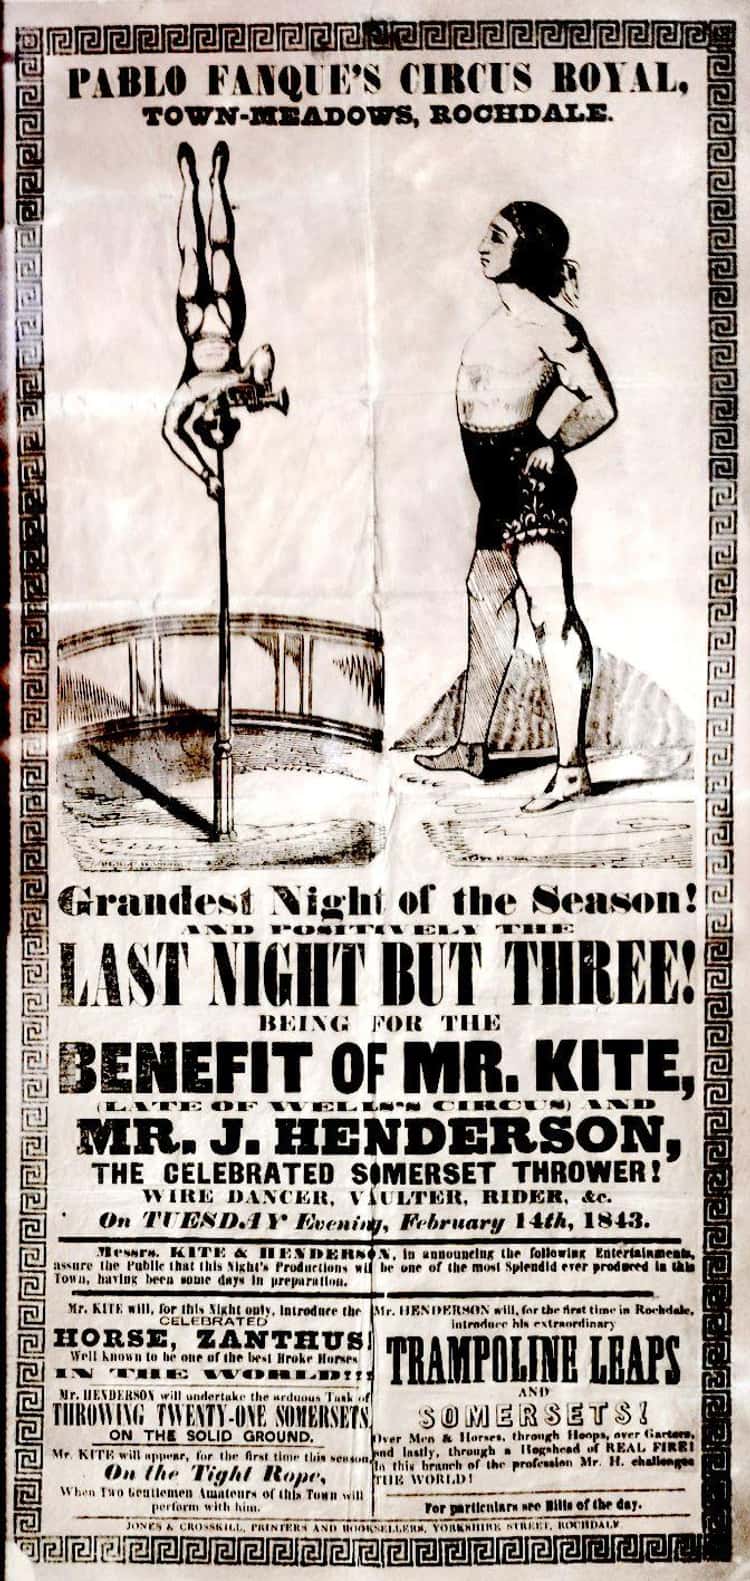 'Being For The Benefit Of Mr. Kite!' Was Based On An 1843 Circus Poster